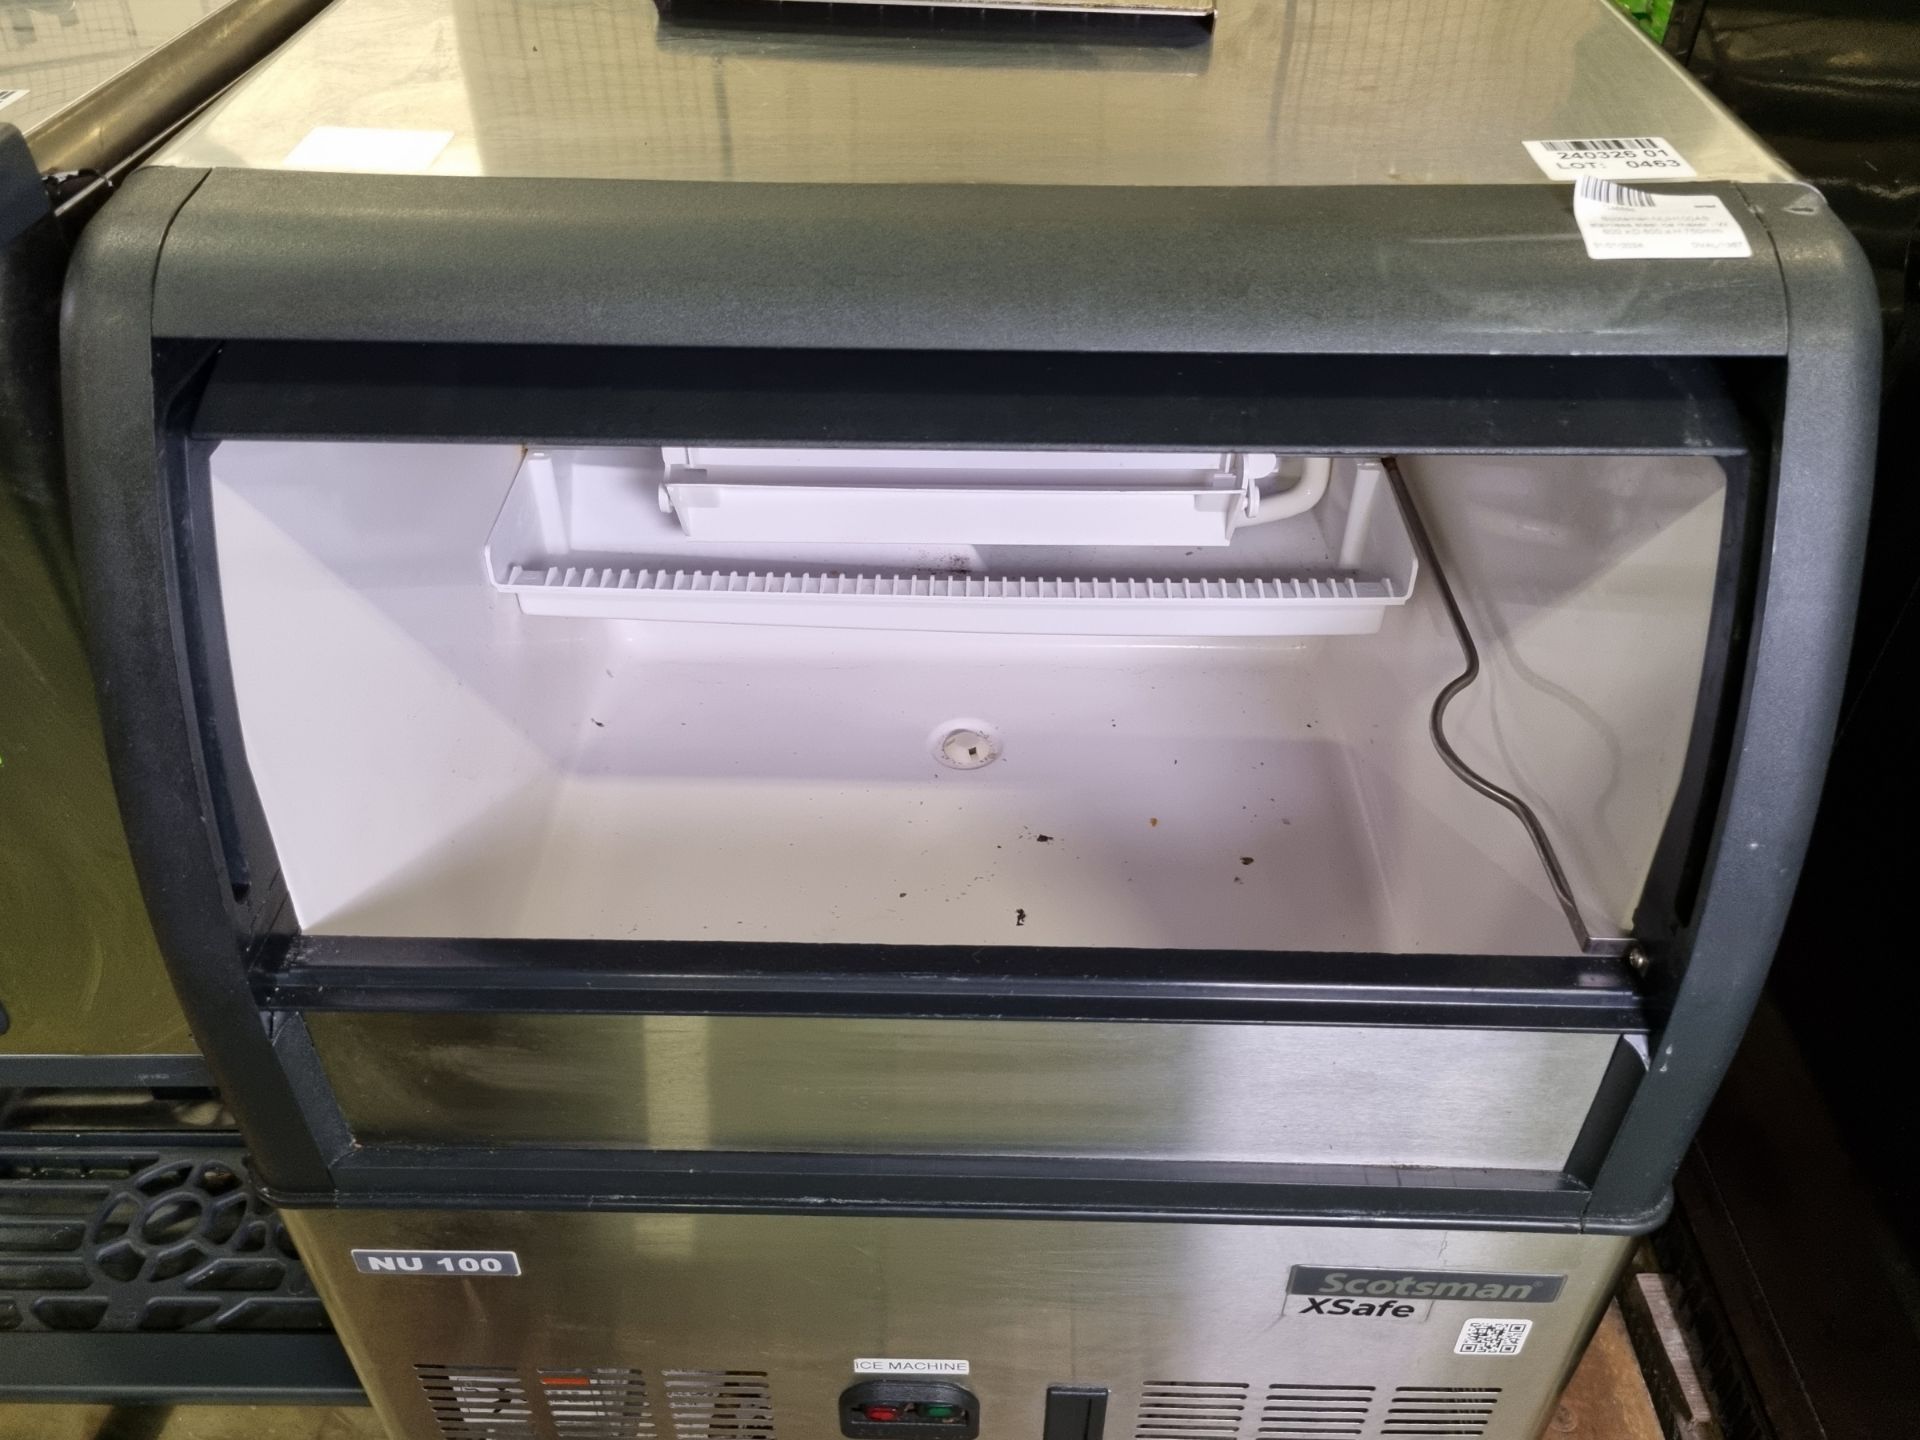 Scotsman NUH100AS stainless steel ice maker - W 600 x D 600 x H 750mm - Image 4 of 5